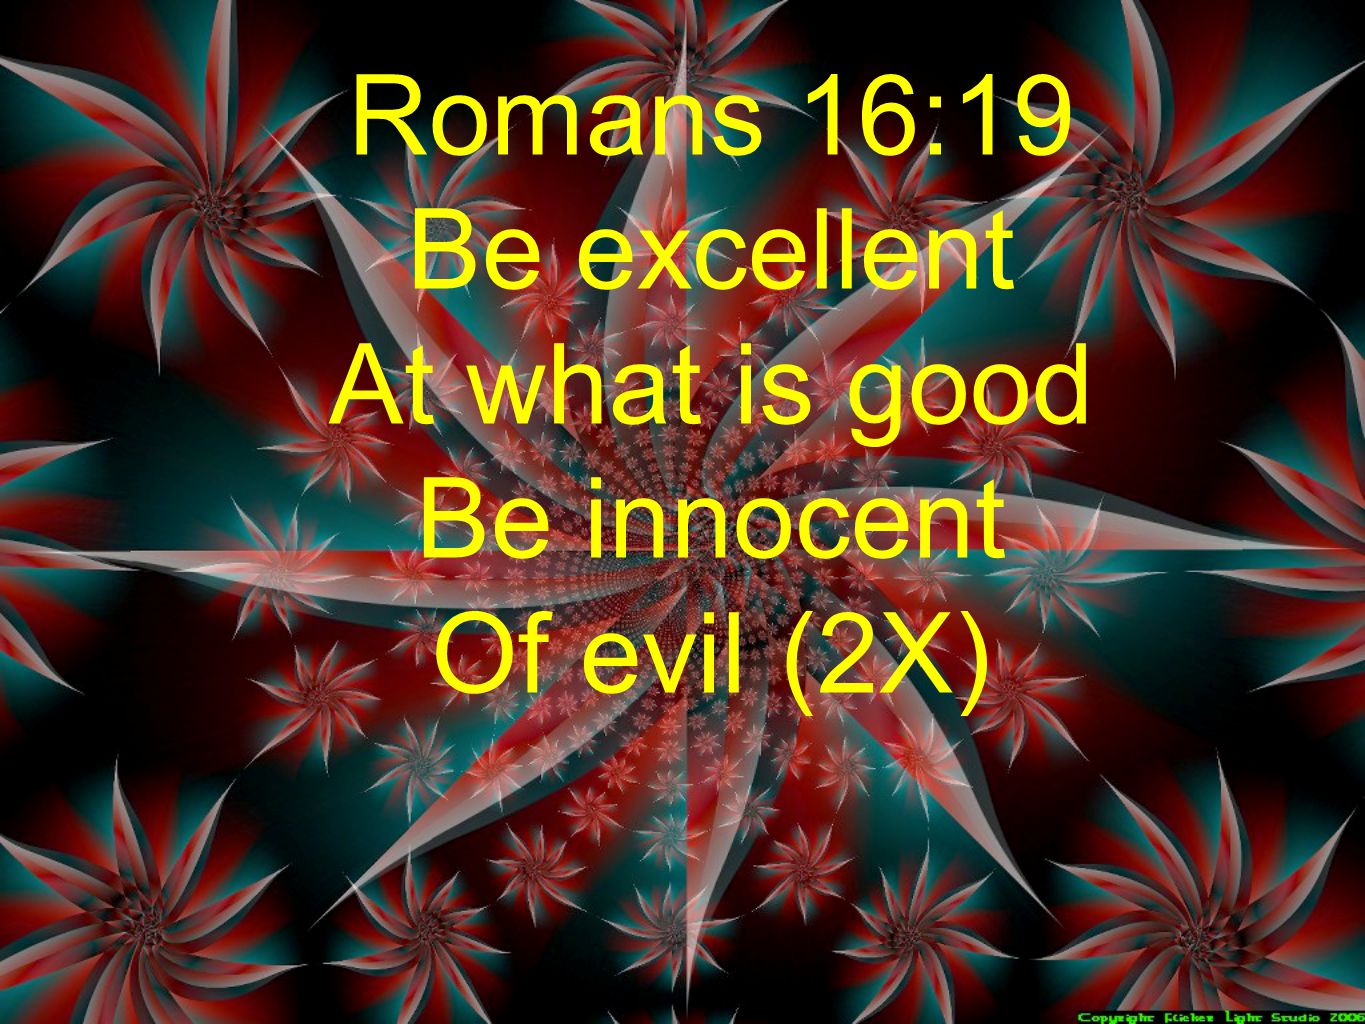 Romans 16:19 Be excellent At what is good Be innocent Of evil (2X)